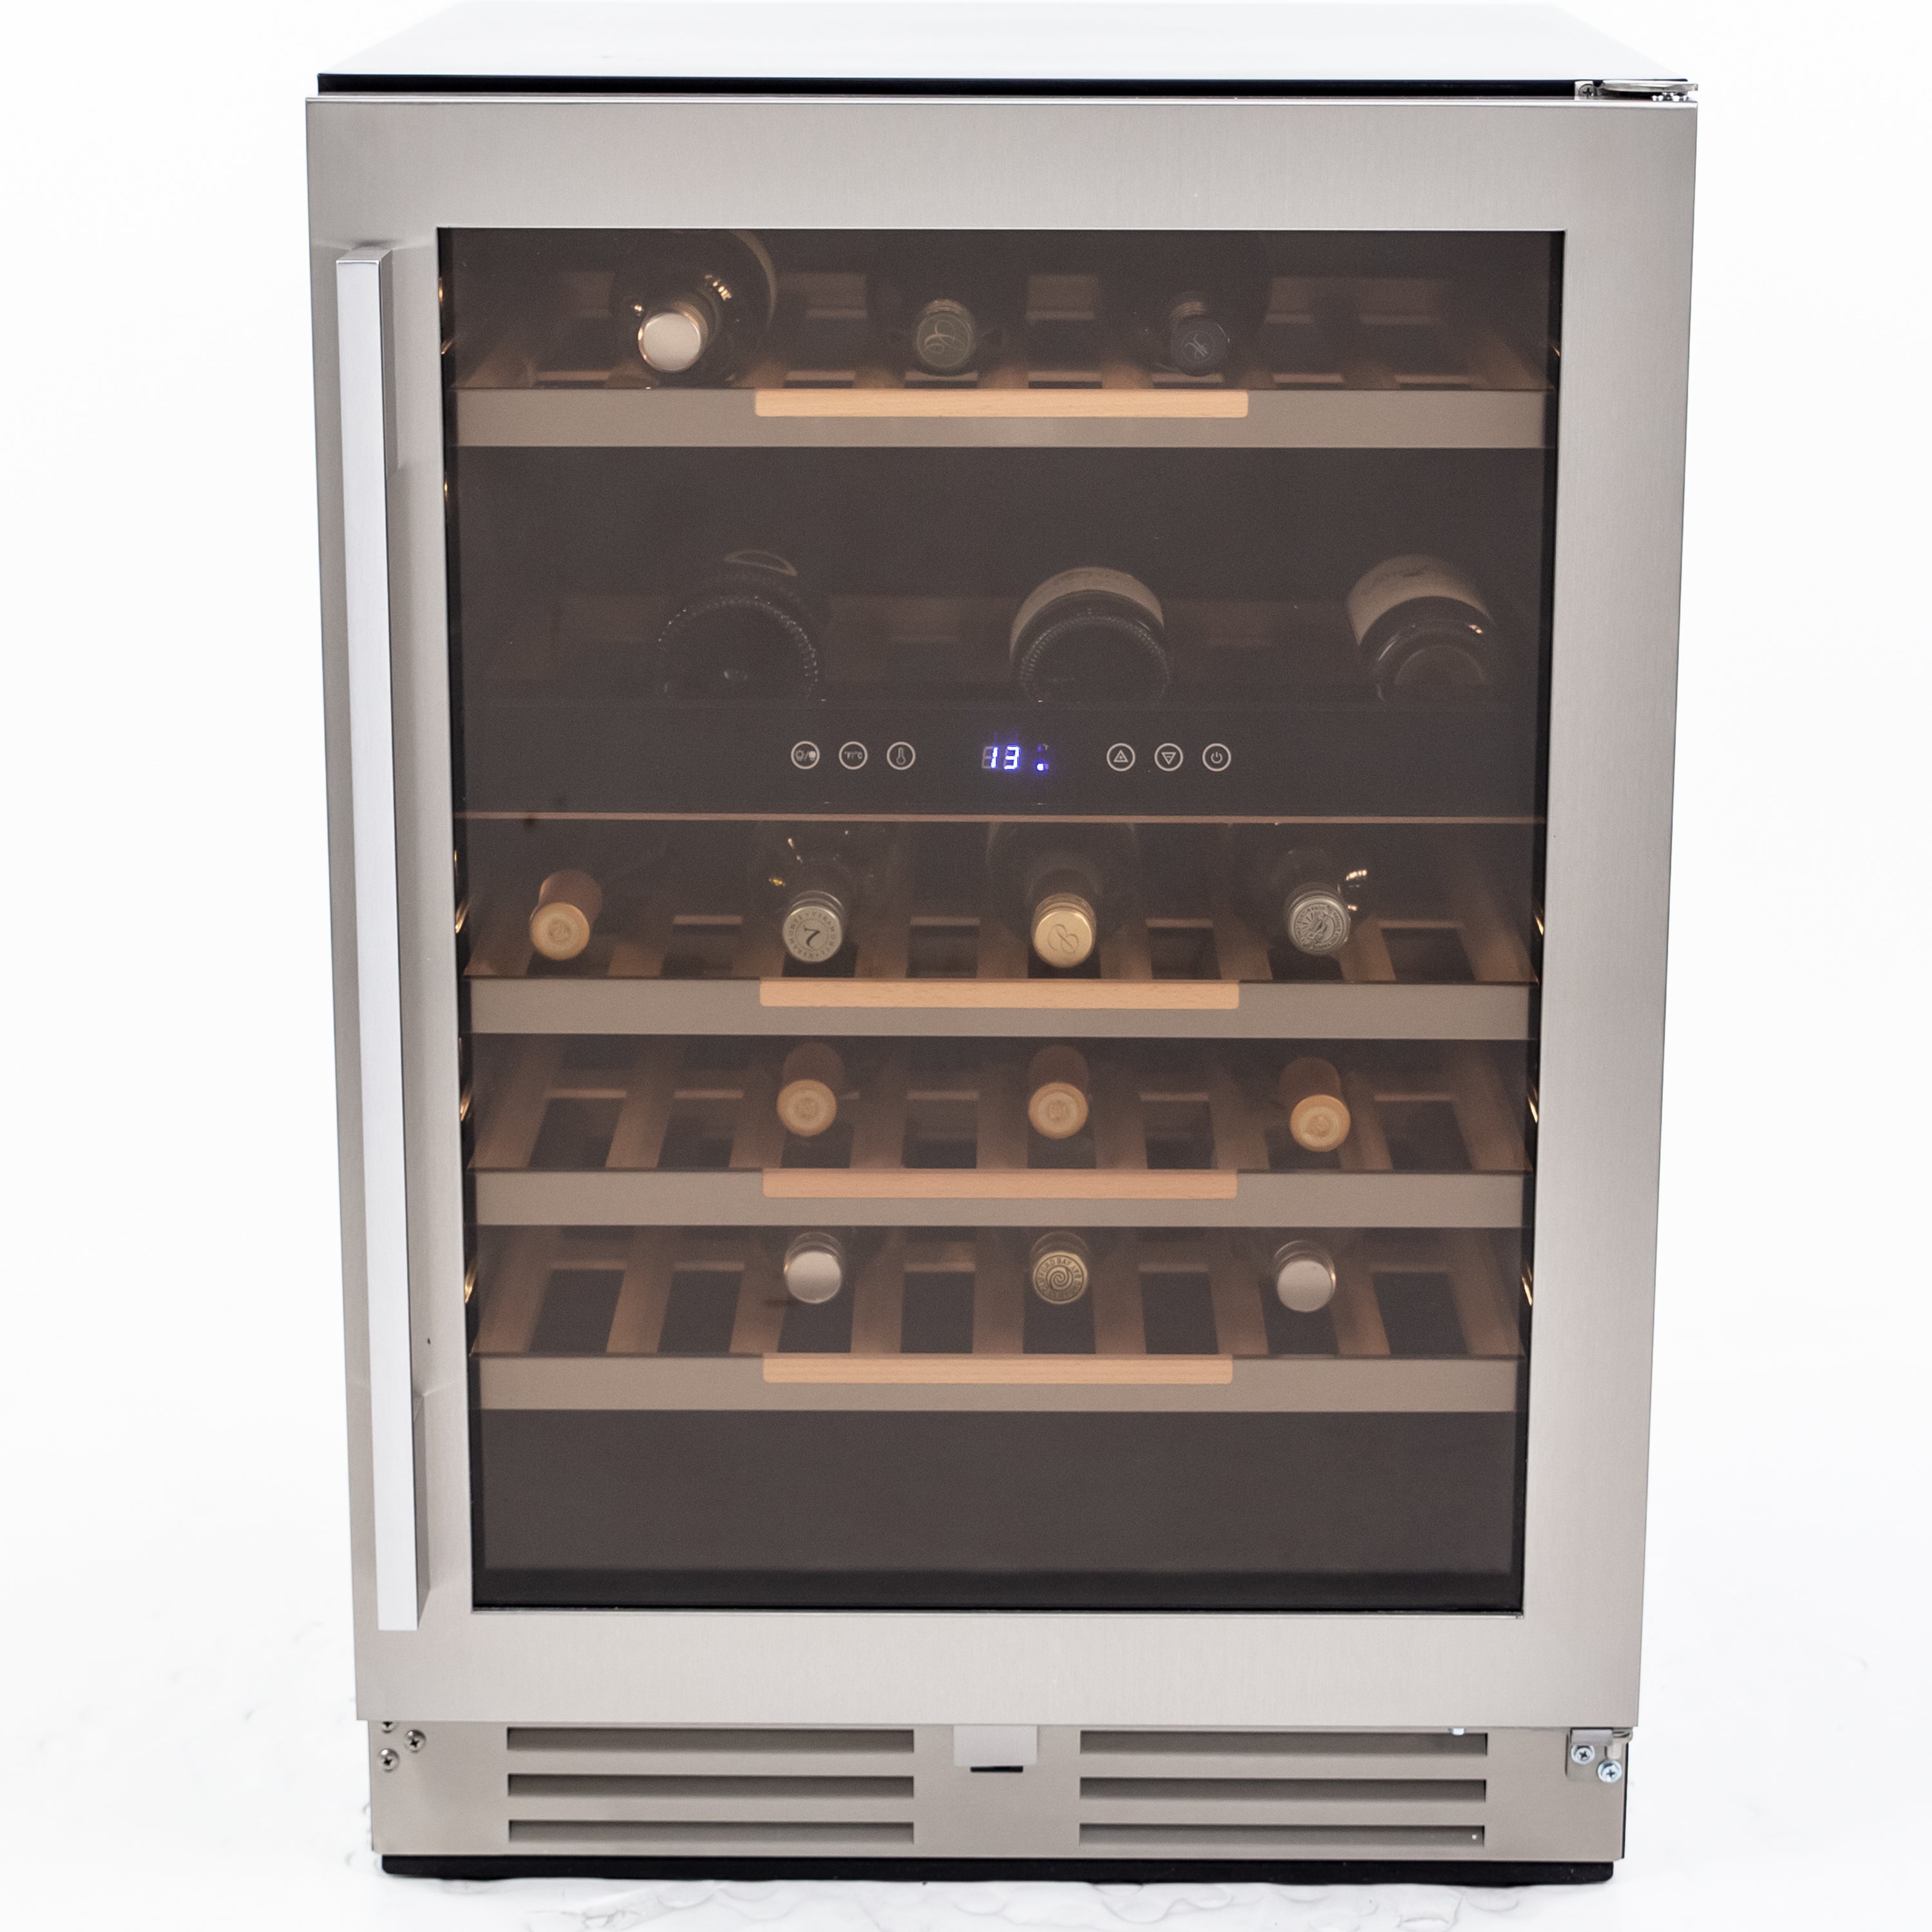 Avanti - WCSE47R3S, Avanti ELITE Series Wine Cooler, 47 Bottle Capacity, in Stainless Steel with Wood Accent Shelving